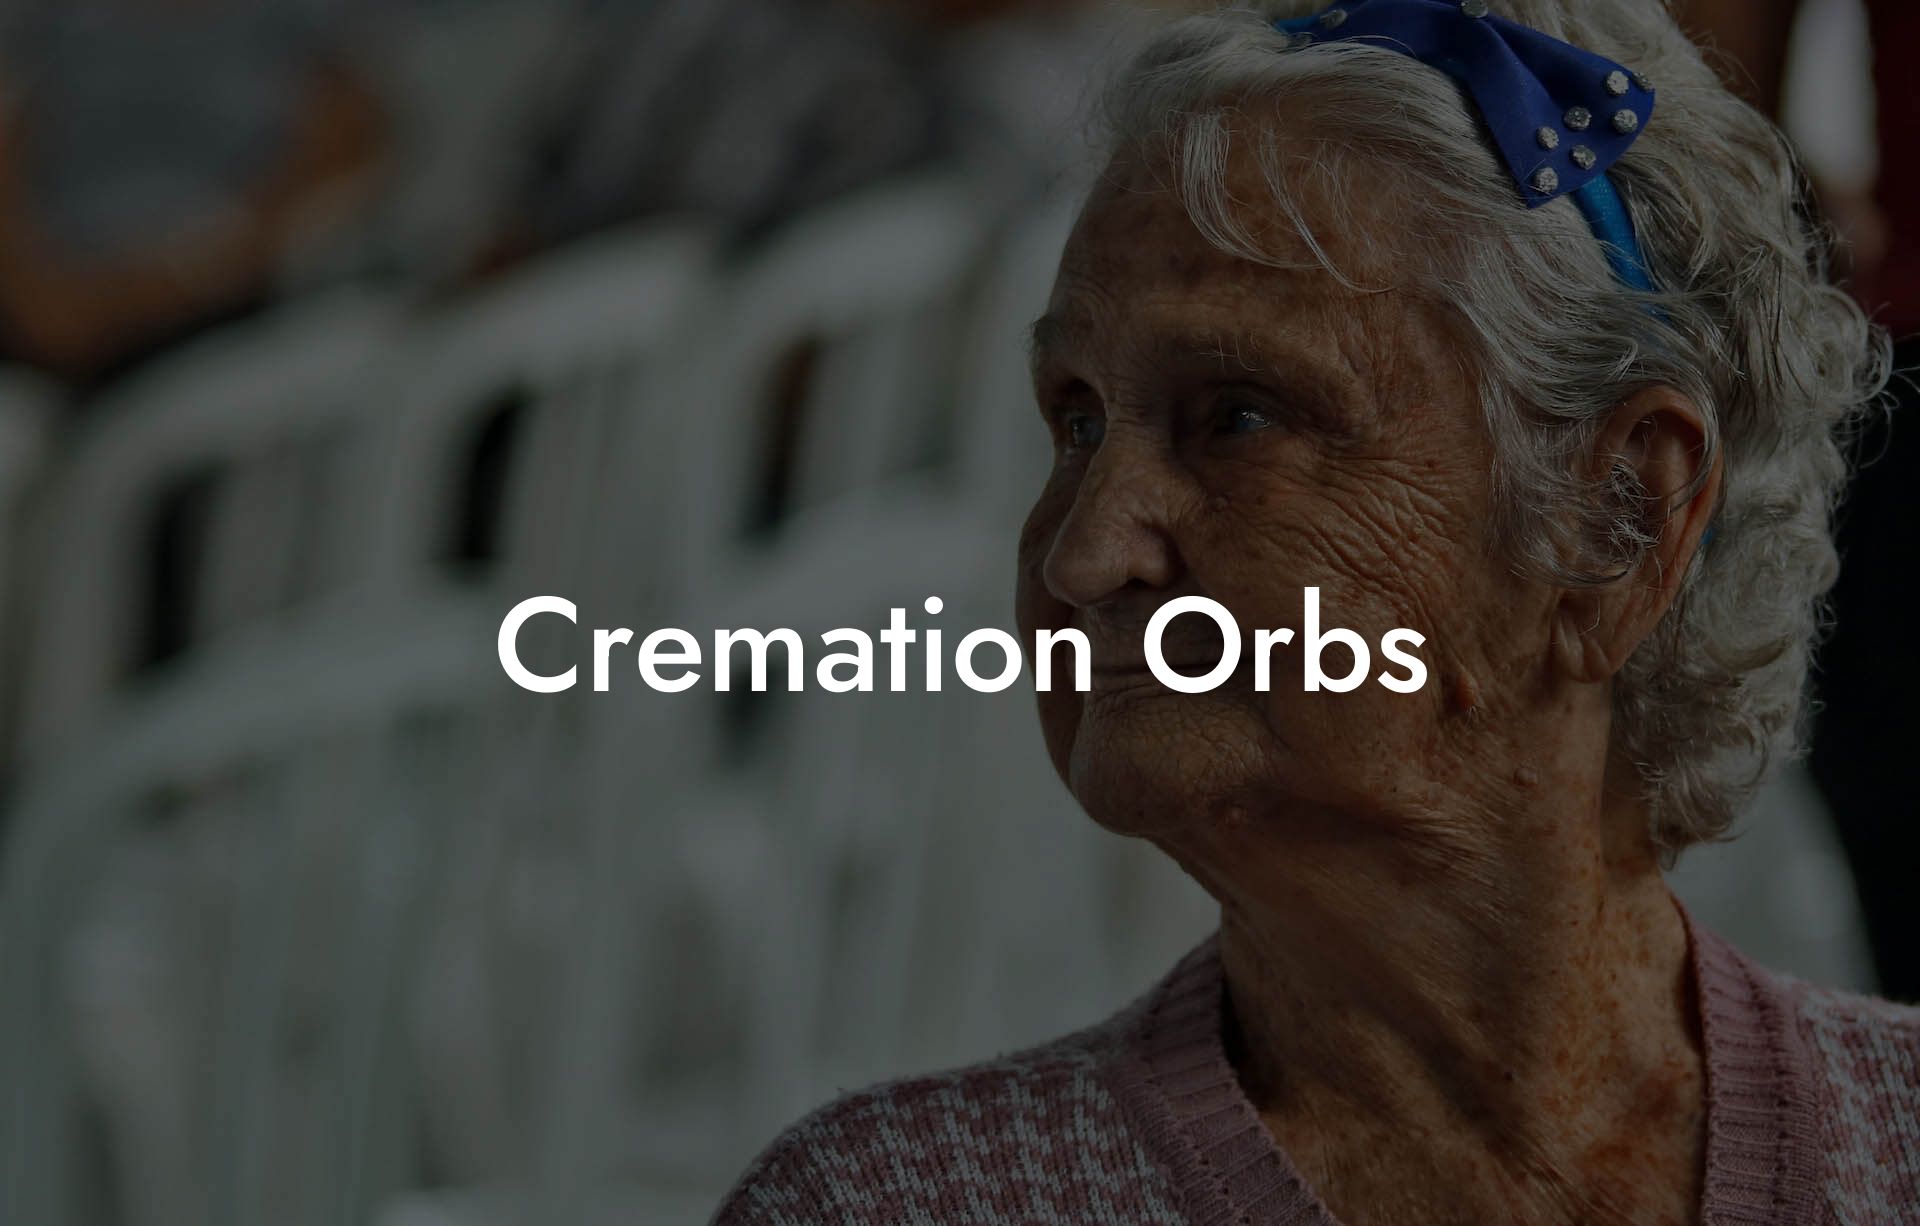 Cremation Orbs